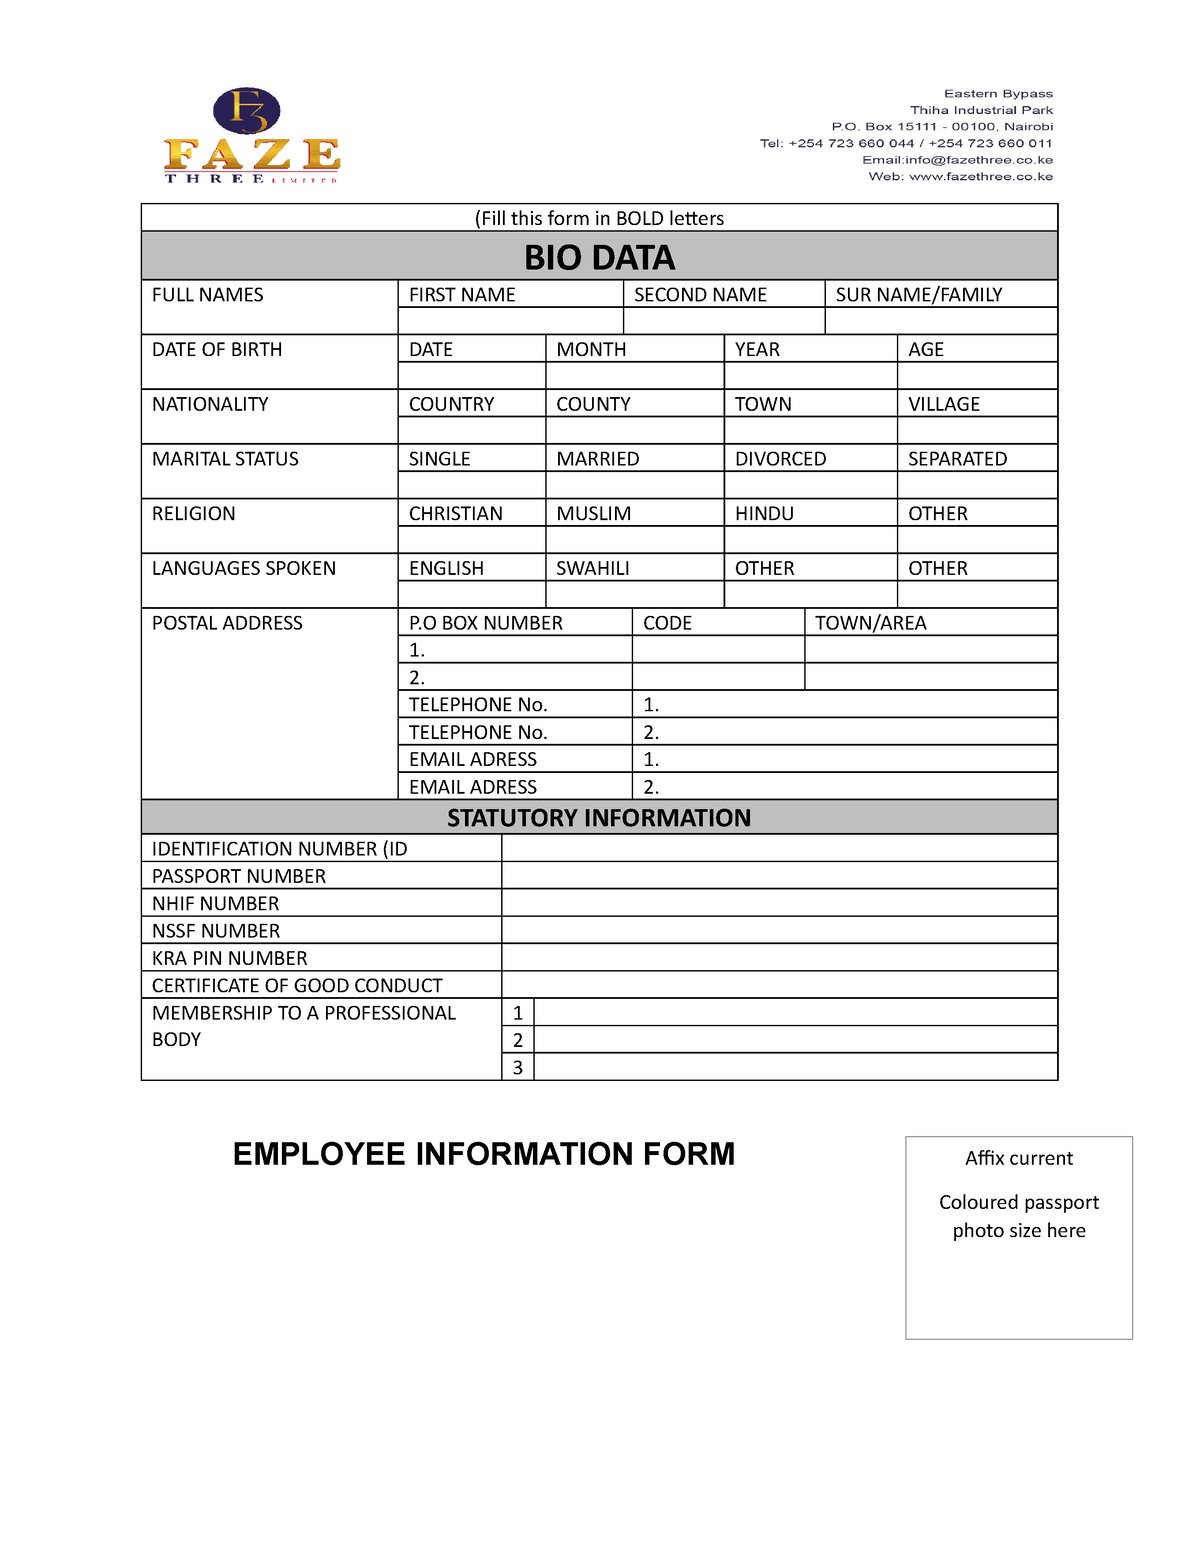 Employee information form (1) - (Fill this form in BOLD letters BIO ...